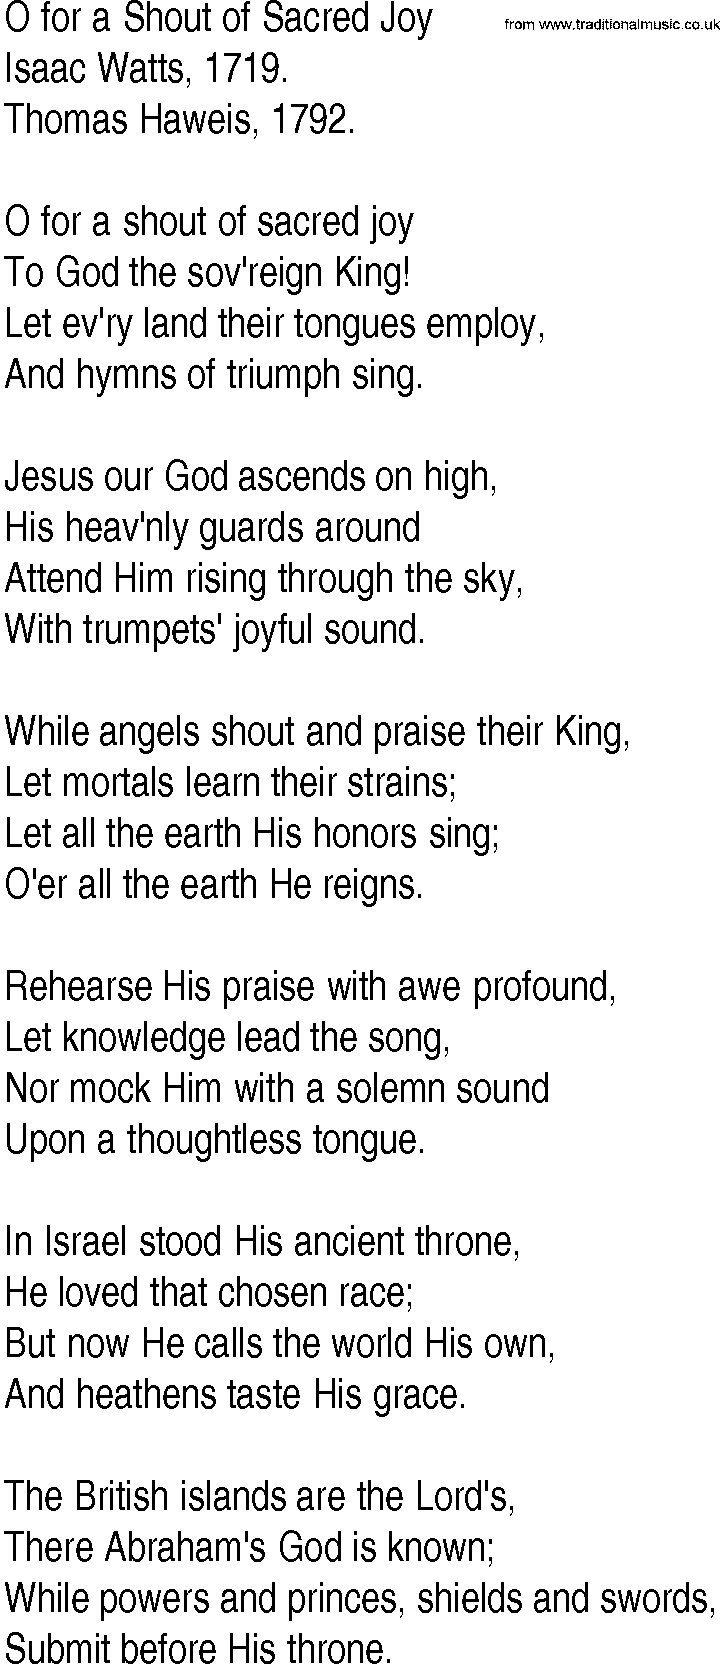 Hymn and Gospel Song: O for a Shout of Sacred Joy by Isaac Watts lyrics